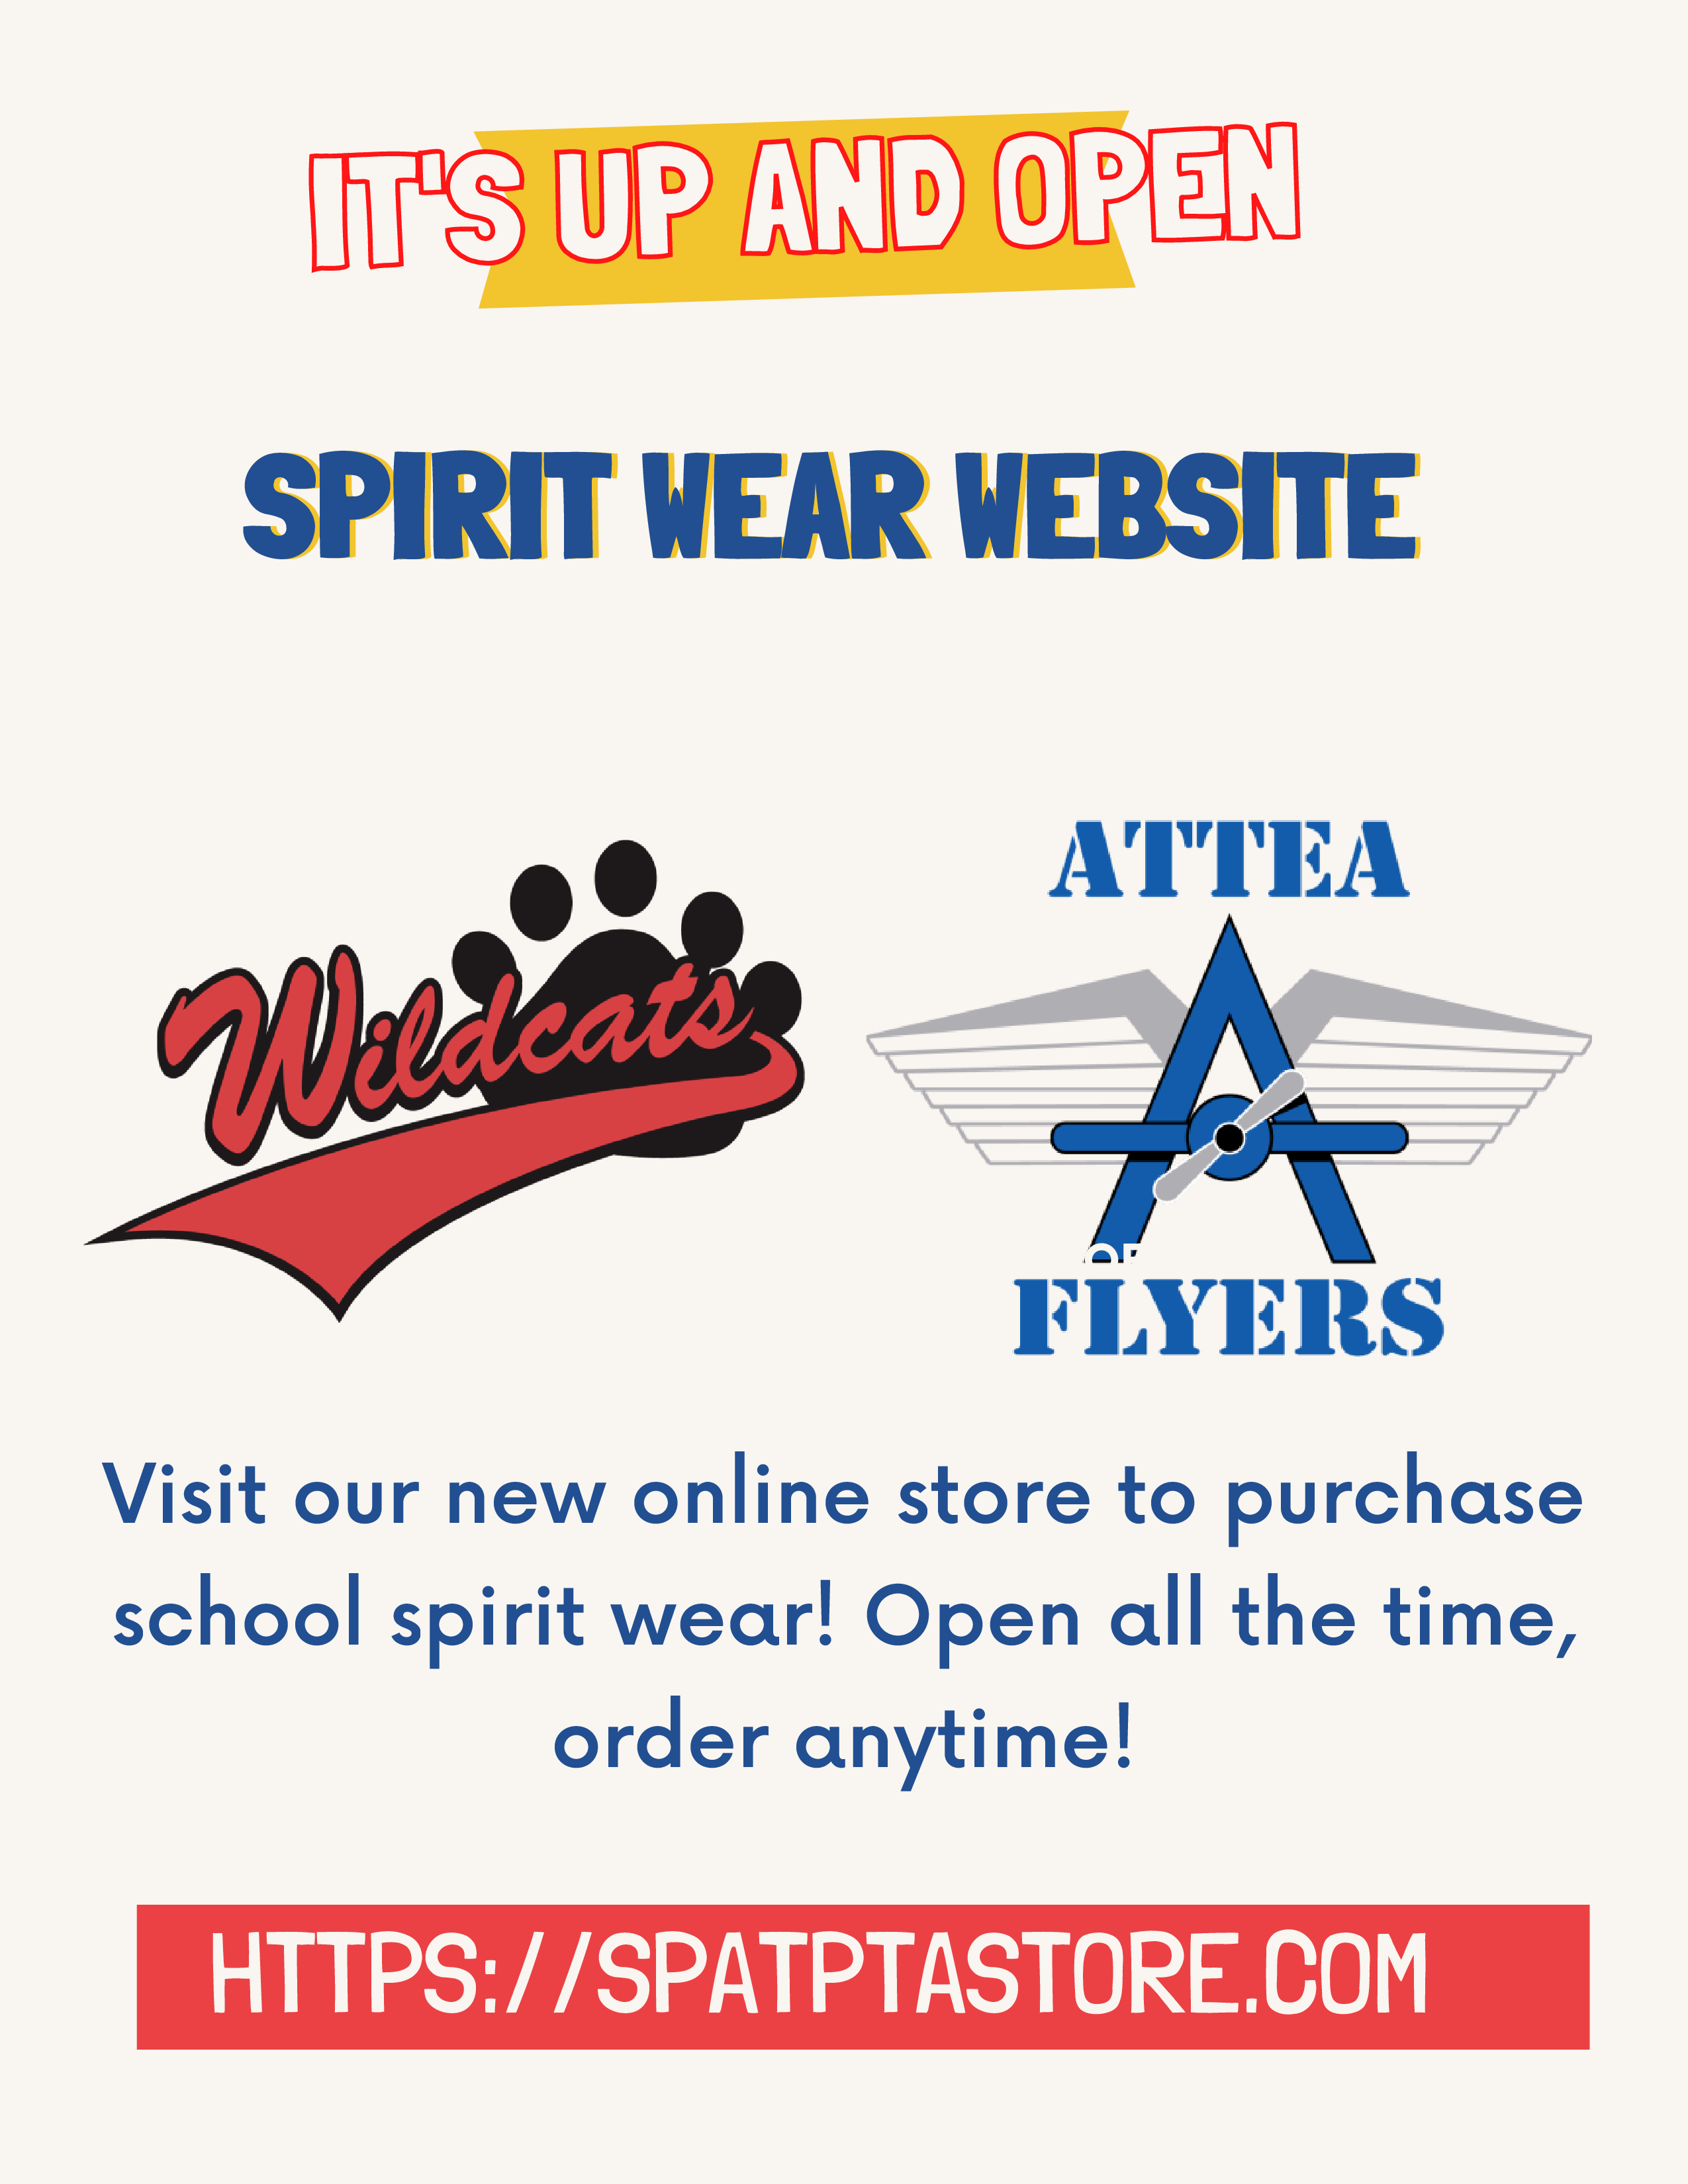 It's up and open! Spirit Wear Website (then Springman Wildcats logo and Attea Flyers logo) Visit our now online store to purchase school spirit wear! Open all the time, order anytime!